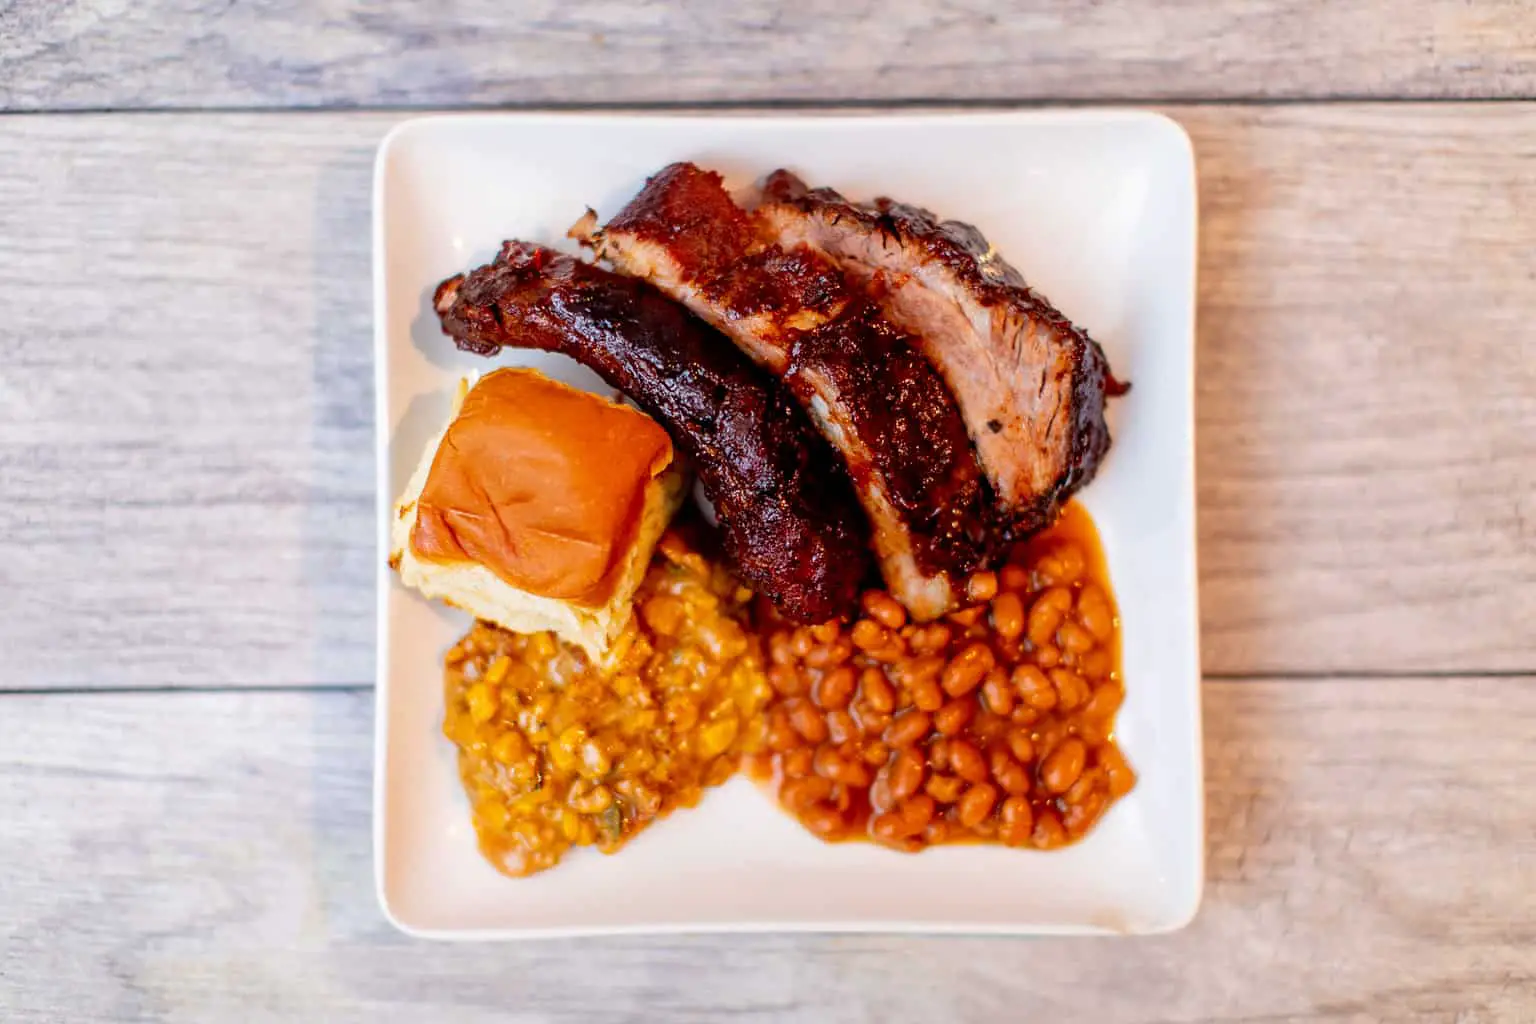 A top view of a sous vide baby back ribs with beans and dinner rolls served on a white plate put on a wooden surface